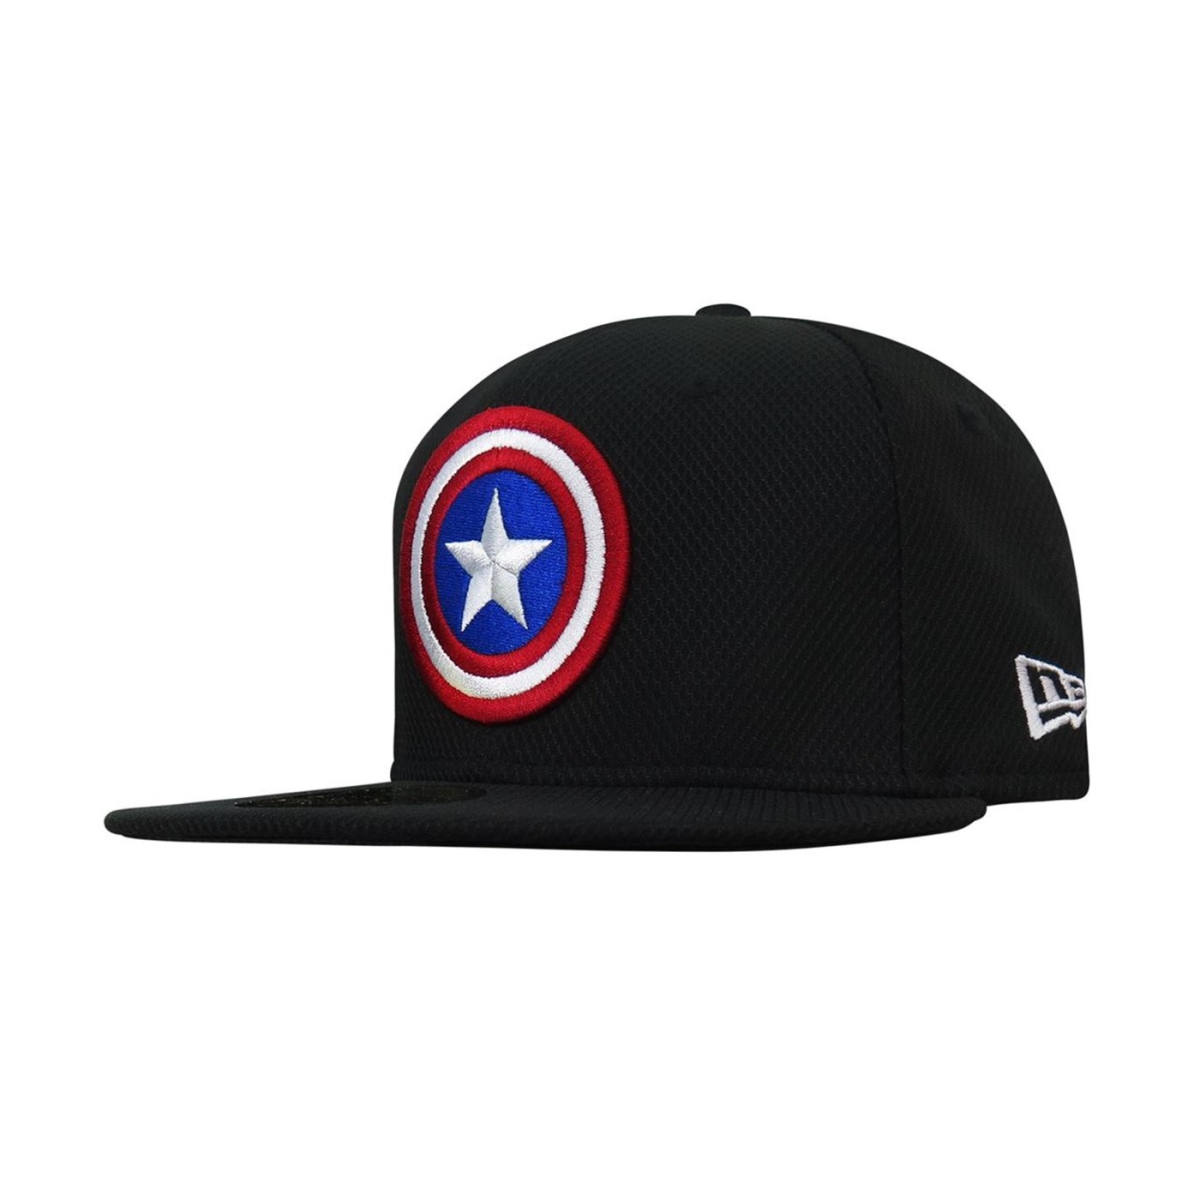 Picture of Captain America hatcapshldsym5950-7-7 Fitted Captain America Shield Black 59Fifty Fitted Hat - Size 7